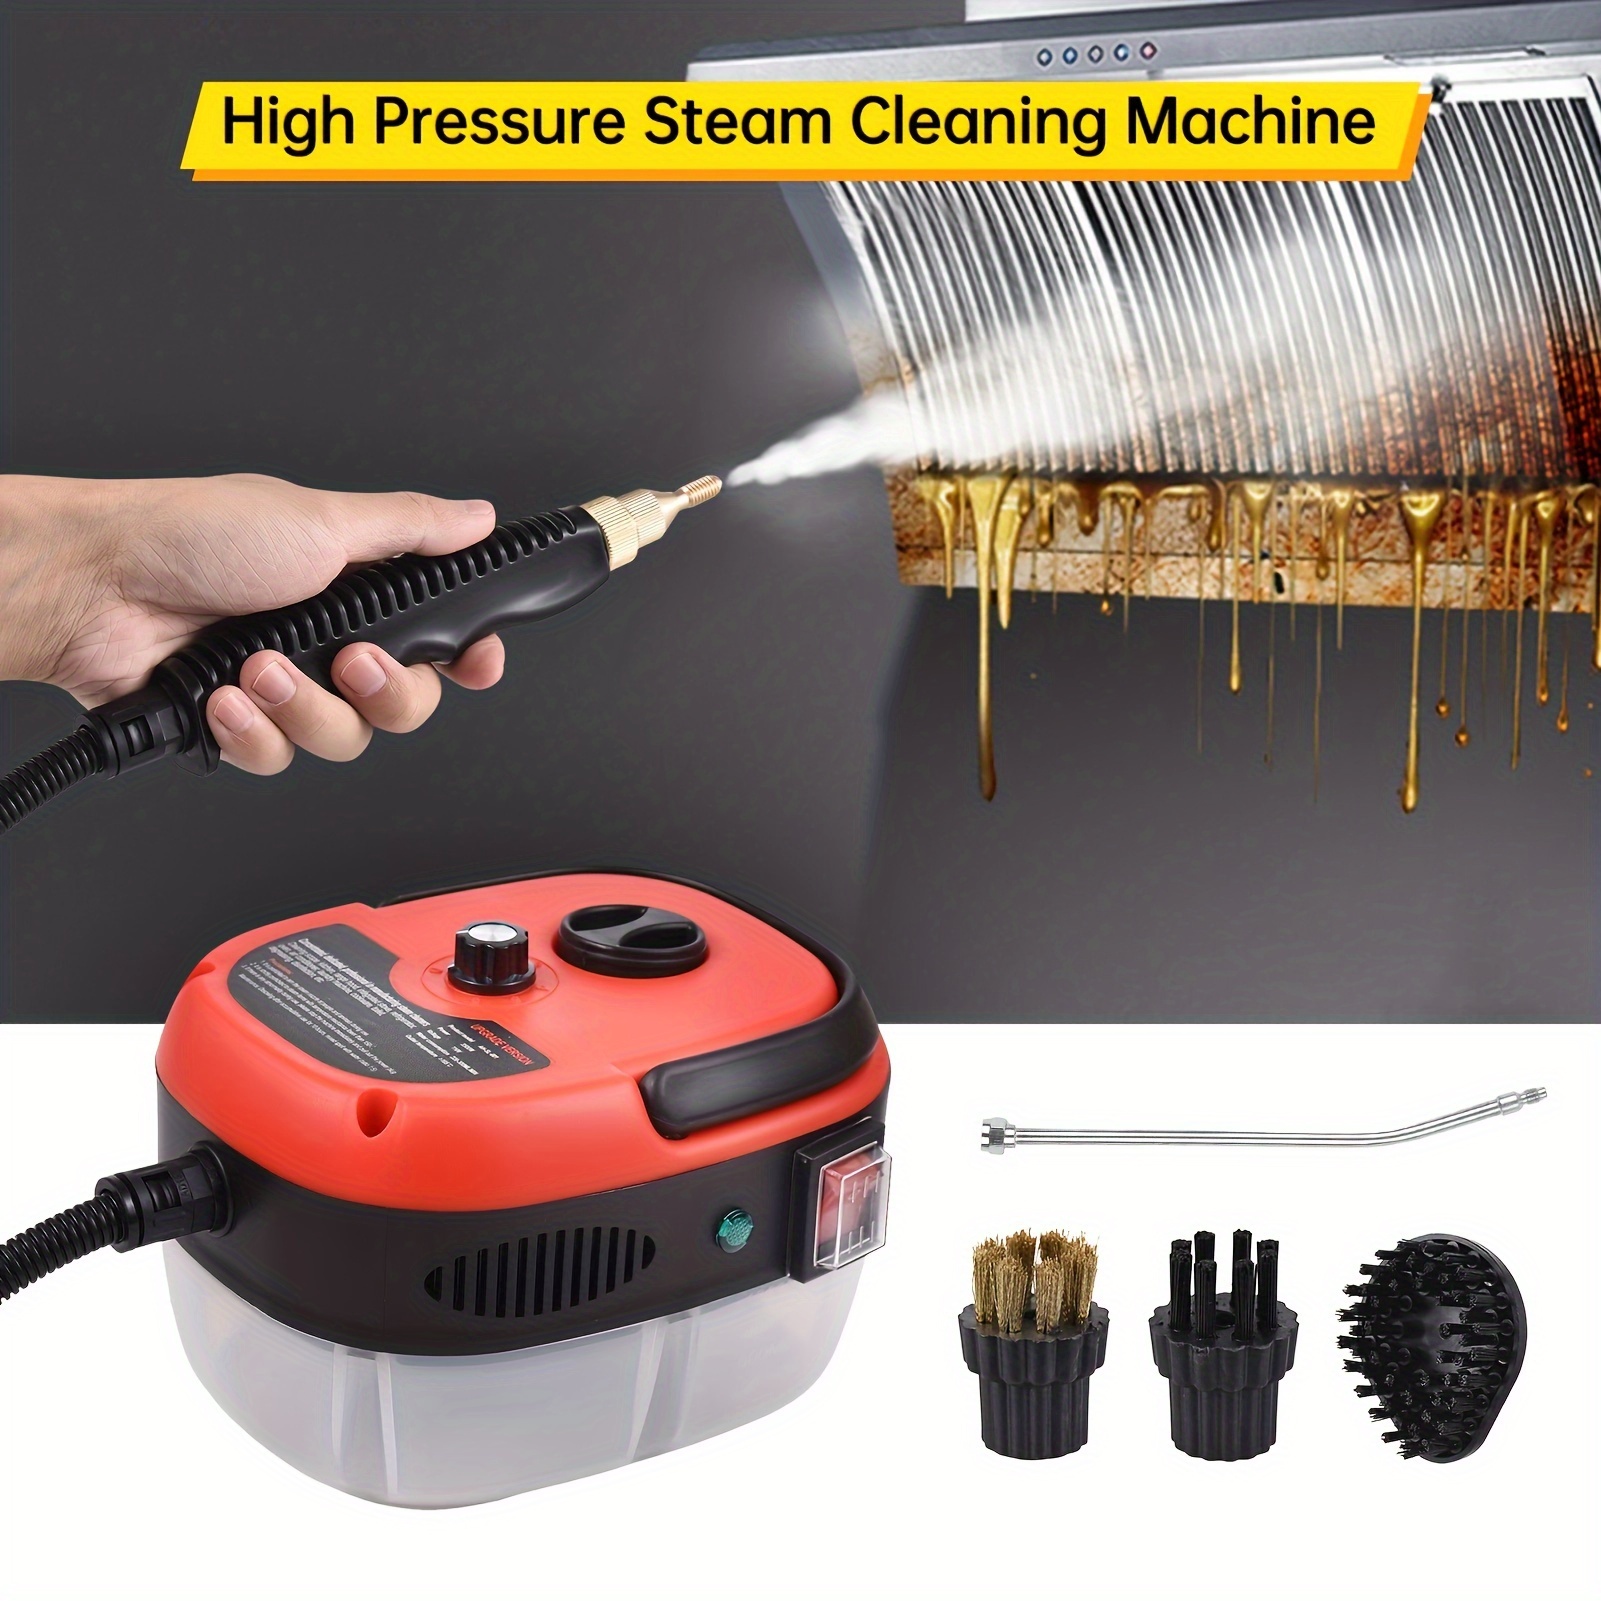 Household High Temperature Steam Cleaner Multifunctional Cleaning Machine  for Air Conditioner Car Kitchen Tiles Floors - AliExpress